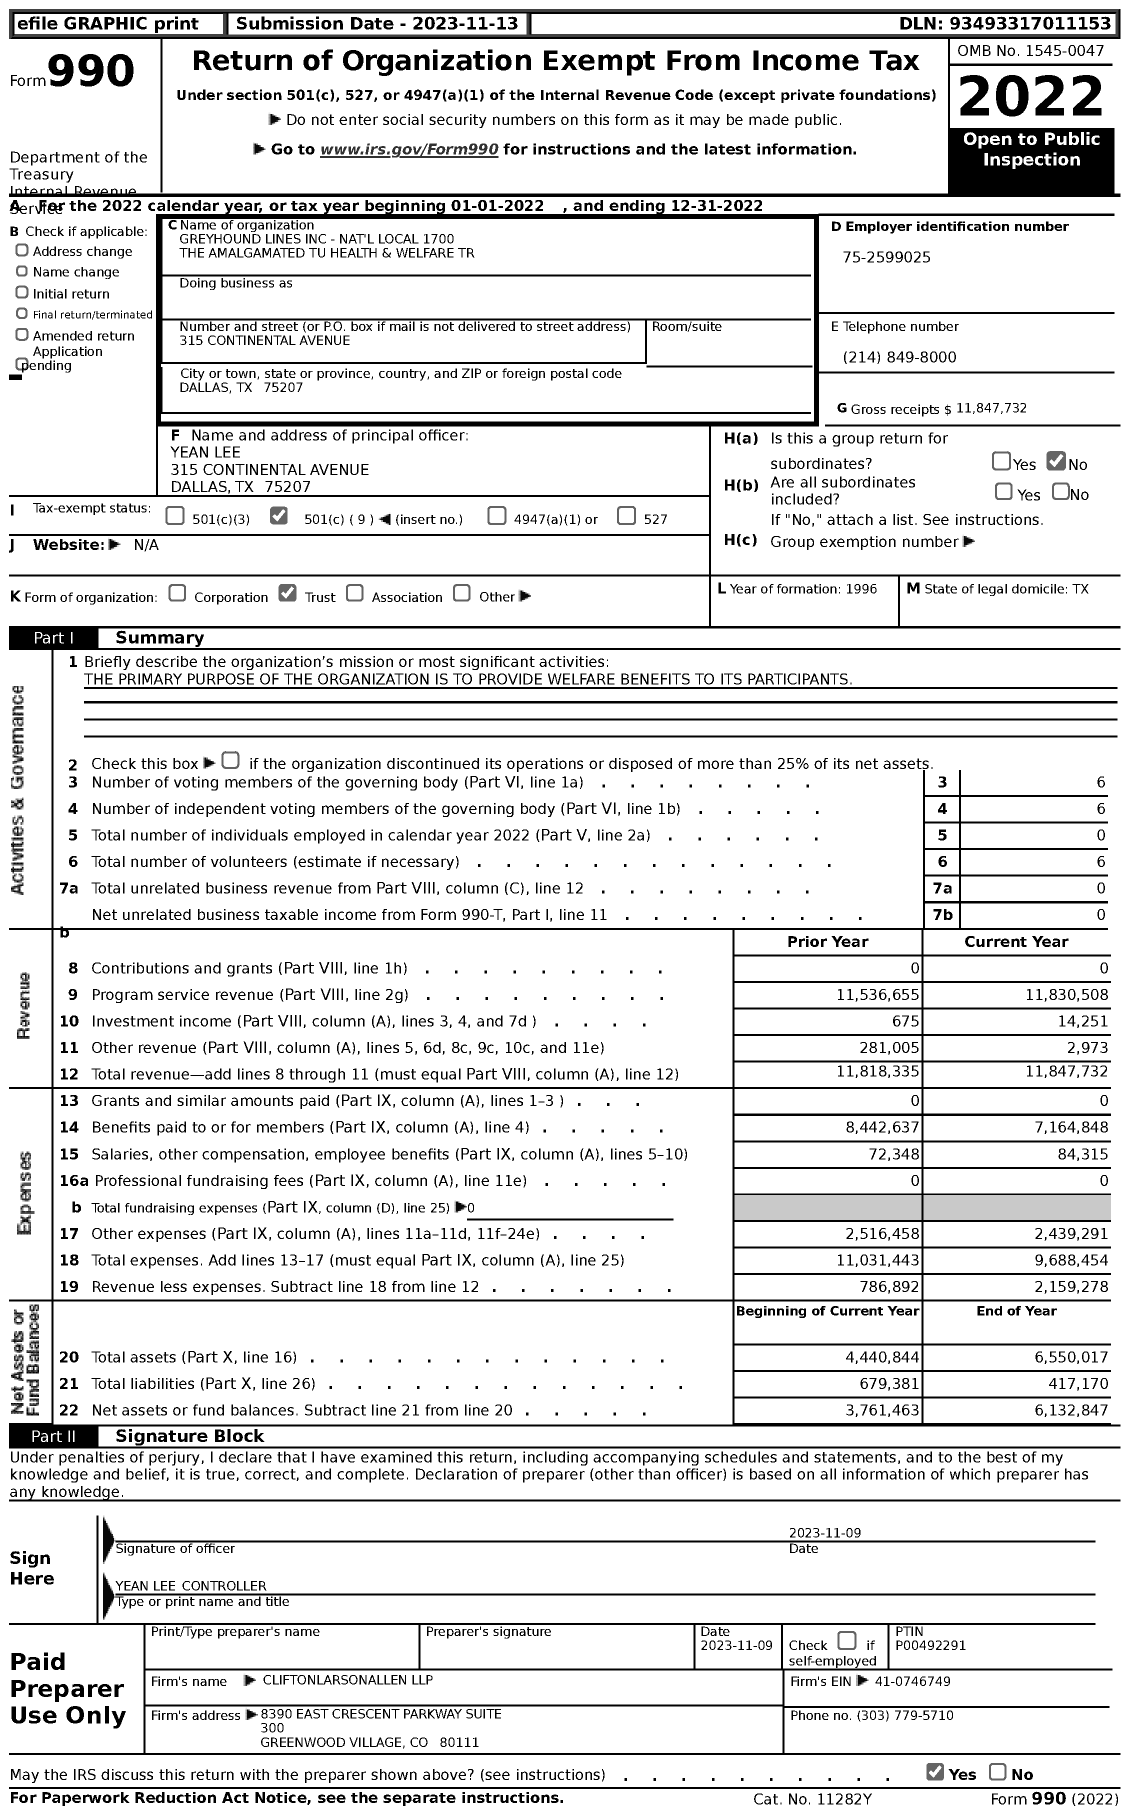 Image of first page of 2022 Form 990 for Greyhound Lines - Nat'l Local 1700 the Amalgamated Tu Health and Welfare Trust